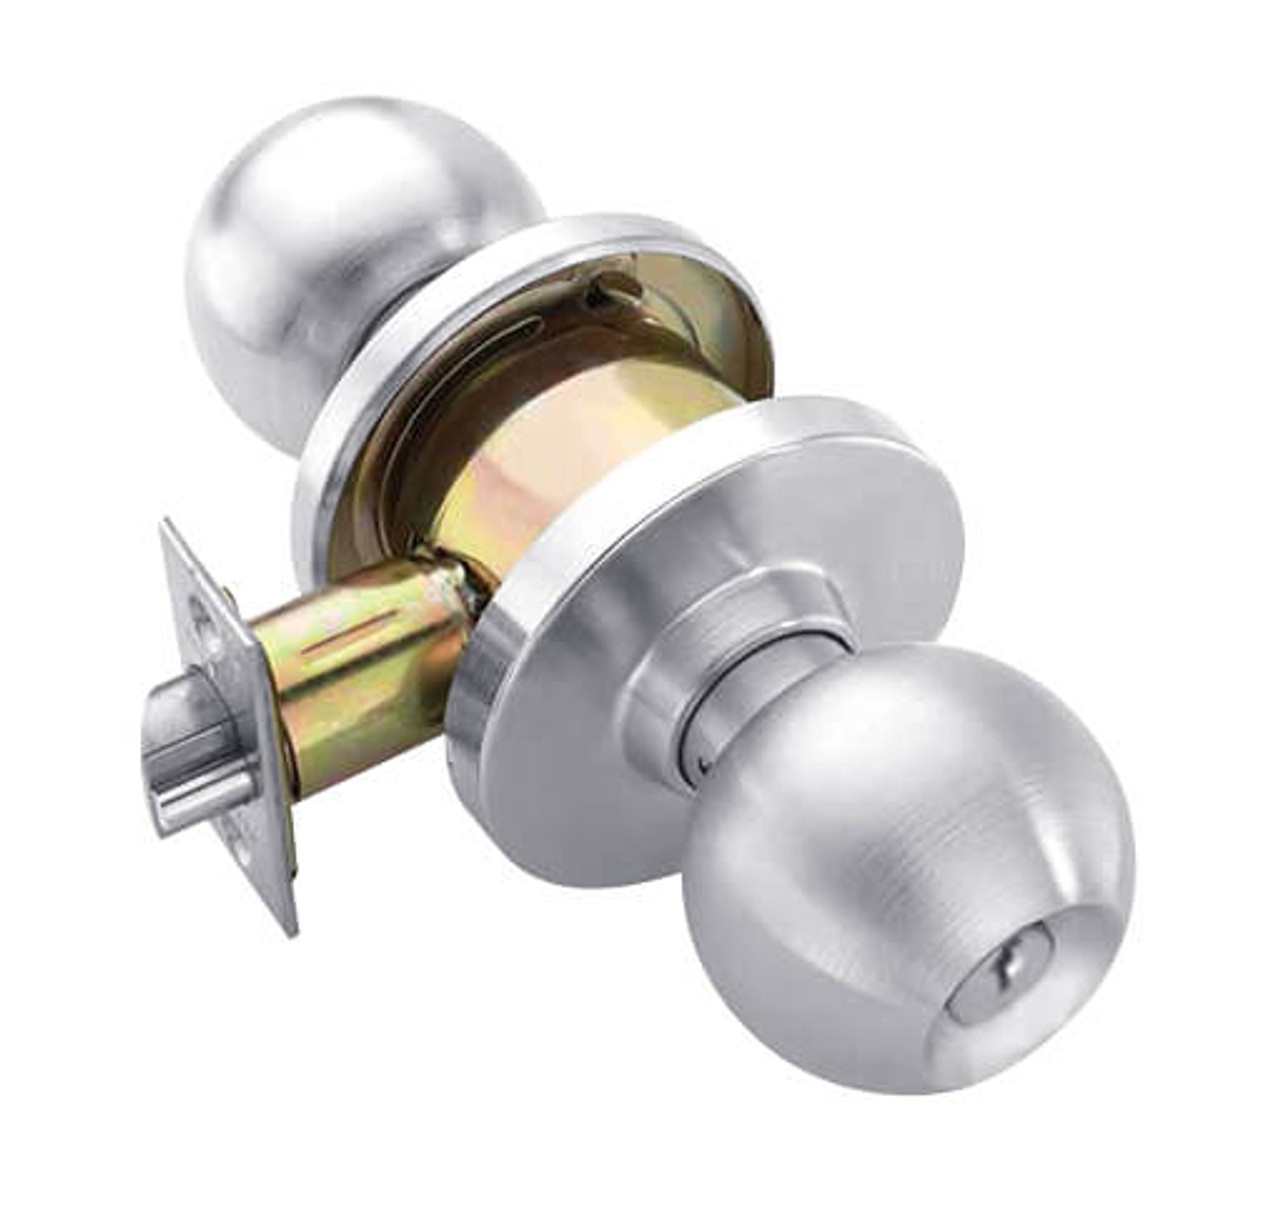 W571PD-H-625 Falcon W Series Cylindrical Corridor Lock with Hana Knob Style in Bright Chrome Finish